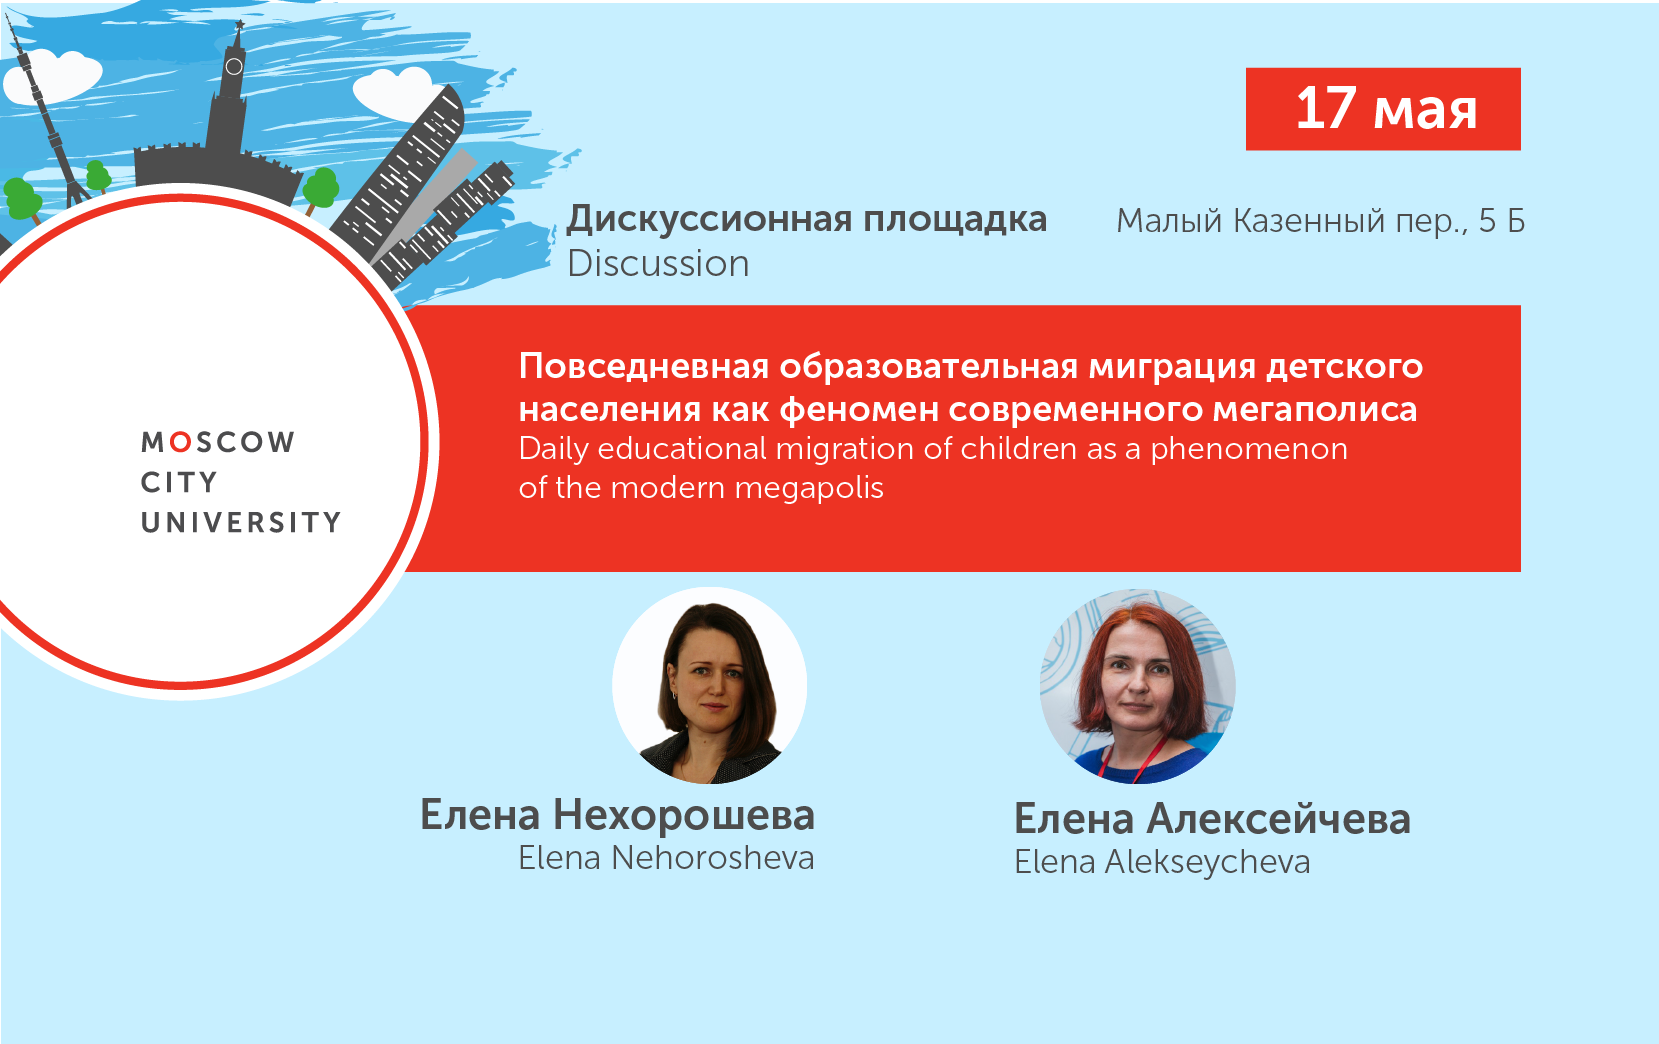 Discussion platform on educational migration of children within Moscow